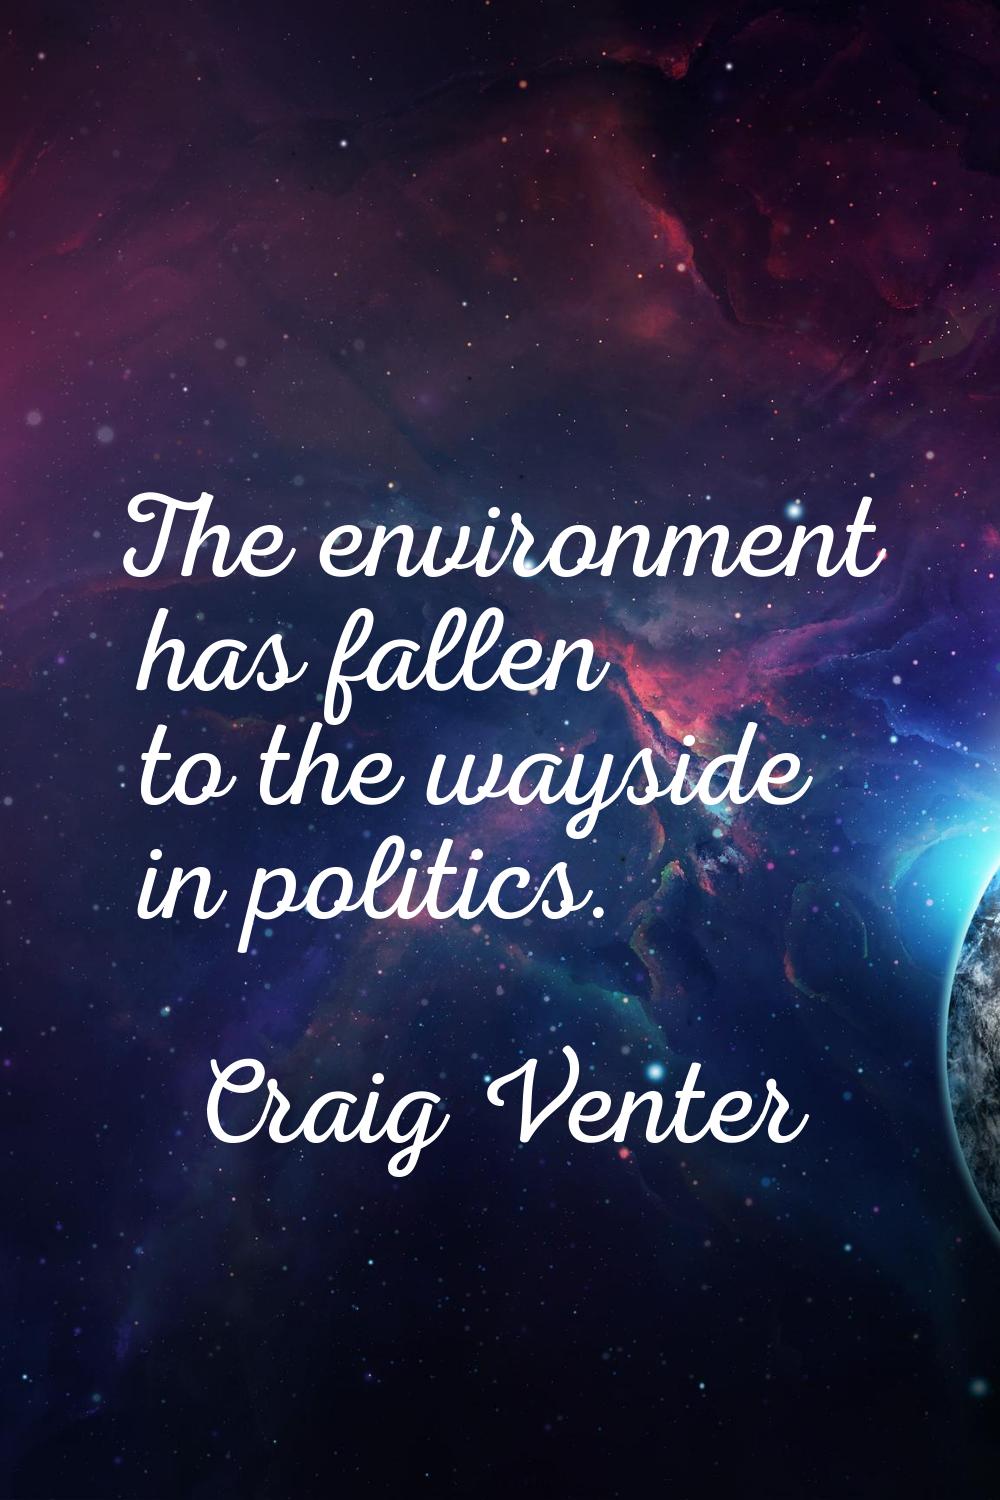 The environment has fallen to the wayside in politics.